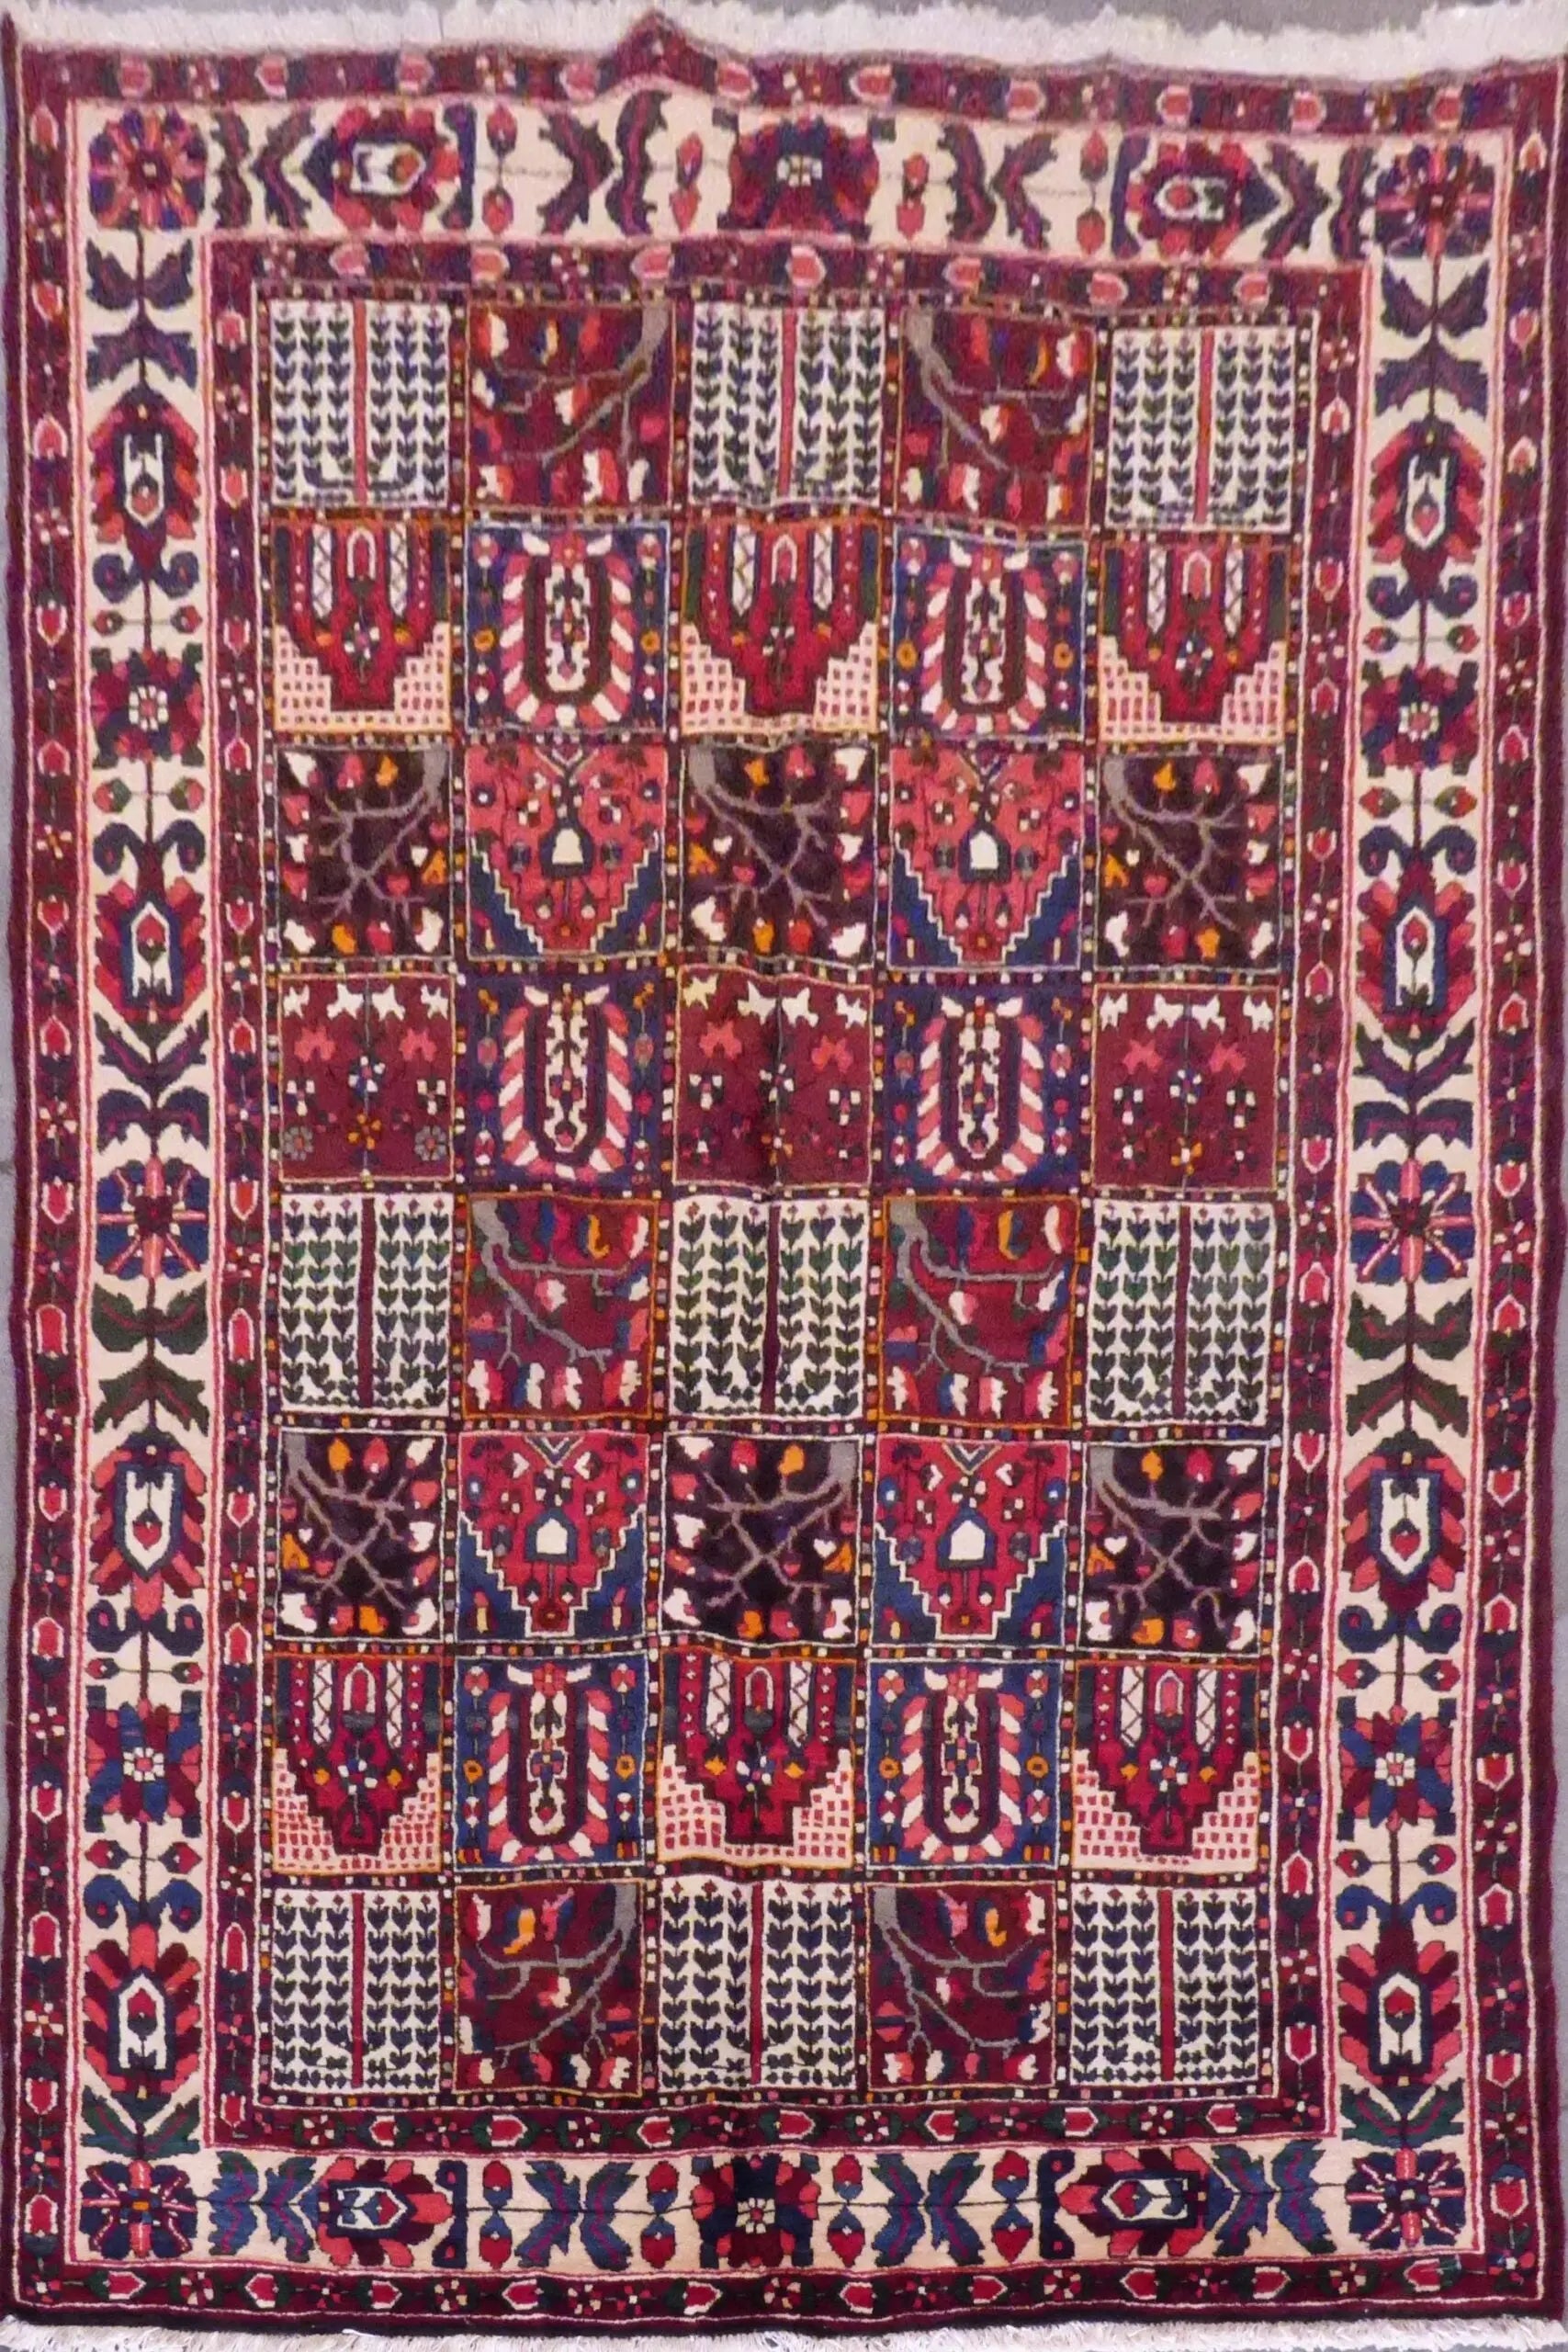 Antique Hand Knotted Persian Tabriz Rugs, Wool & Cotton, Red, 10'2" X 6'9", Panr02598 (Red : 10540)